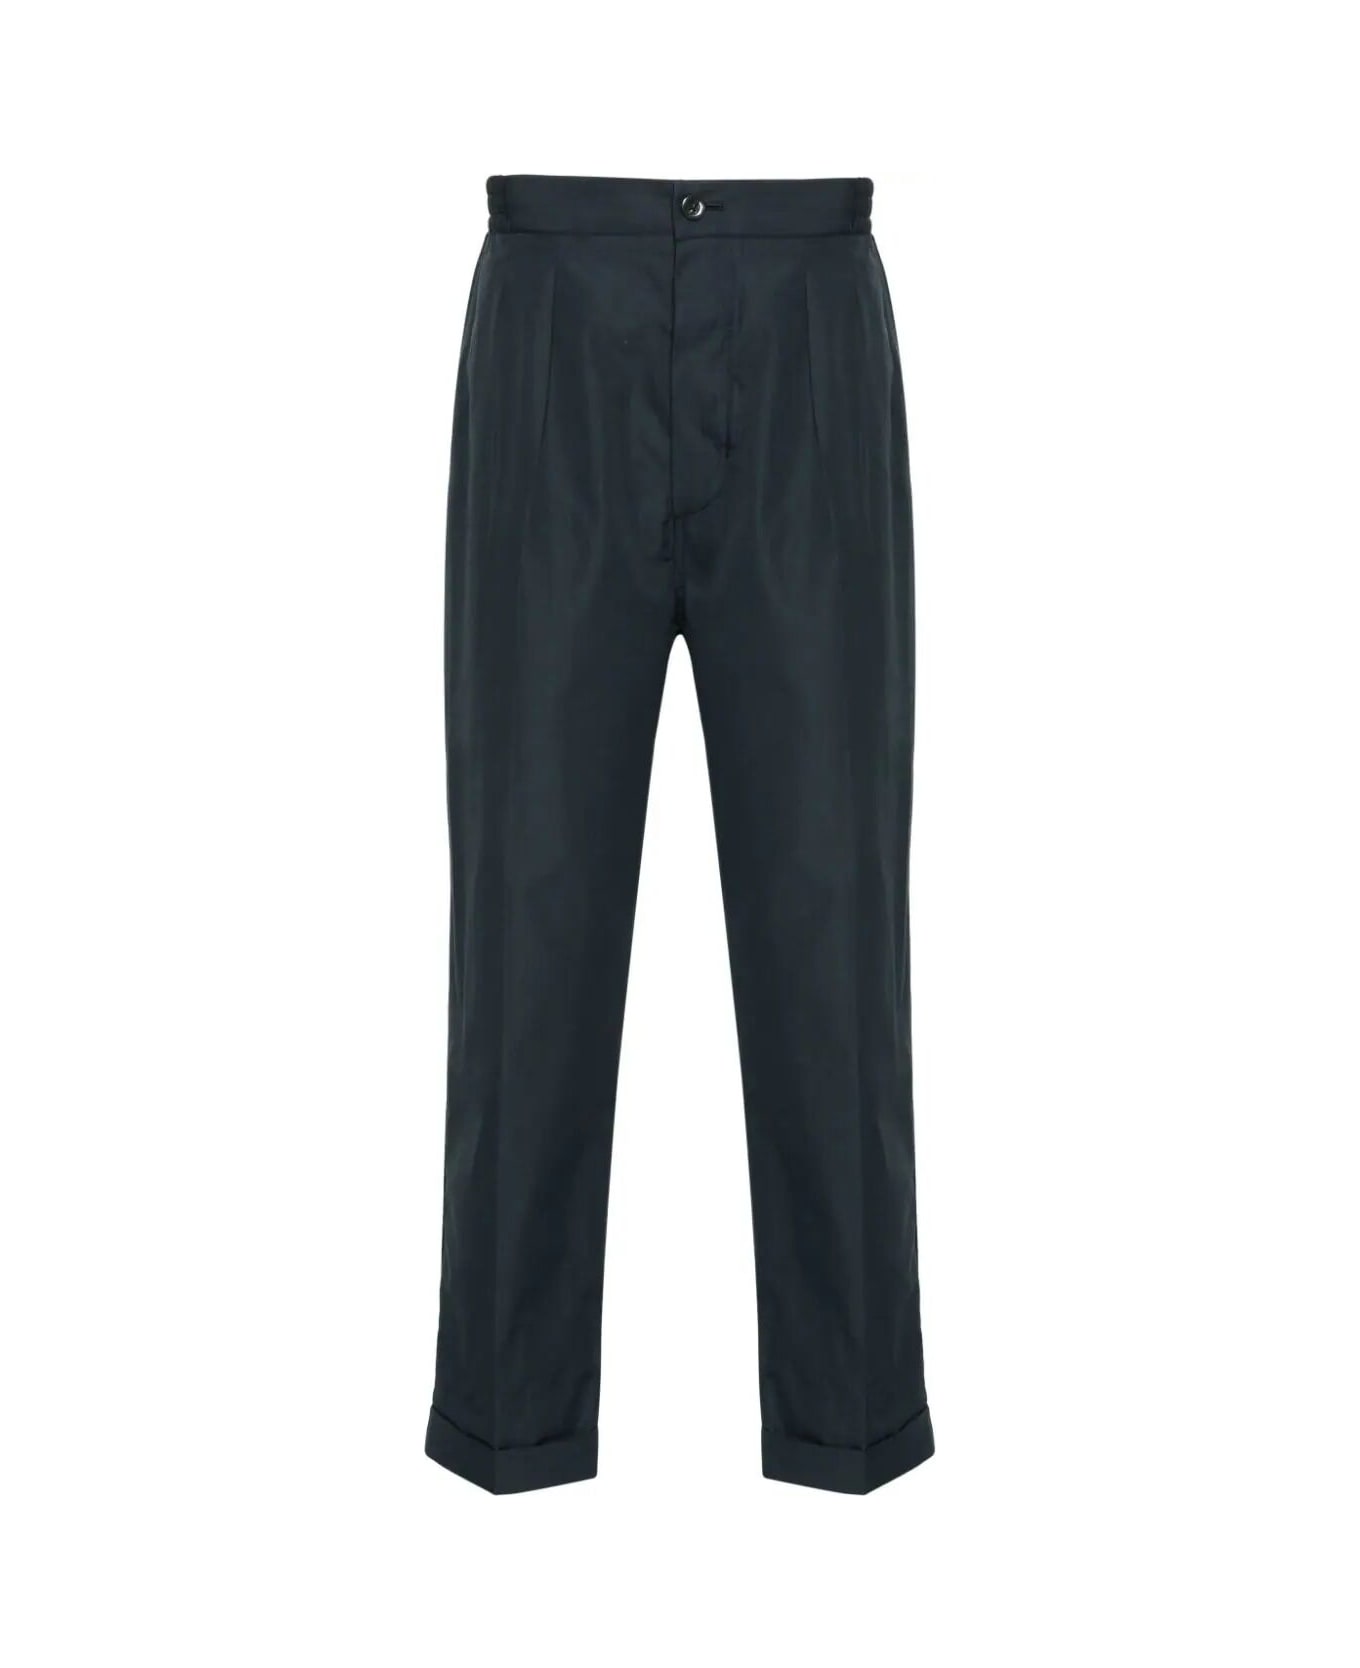 Tom Ford Sport Pants - Ink Blue ボトムス